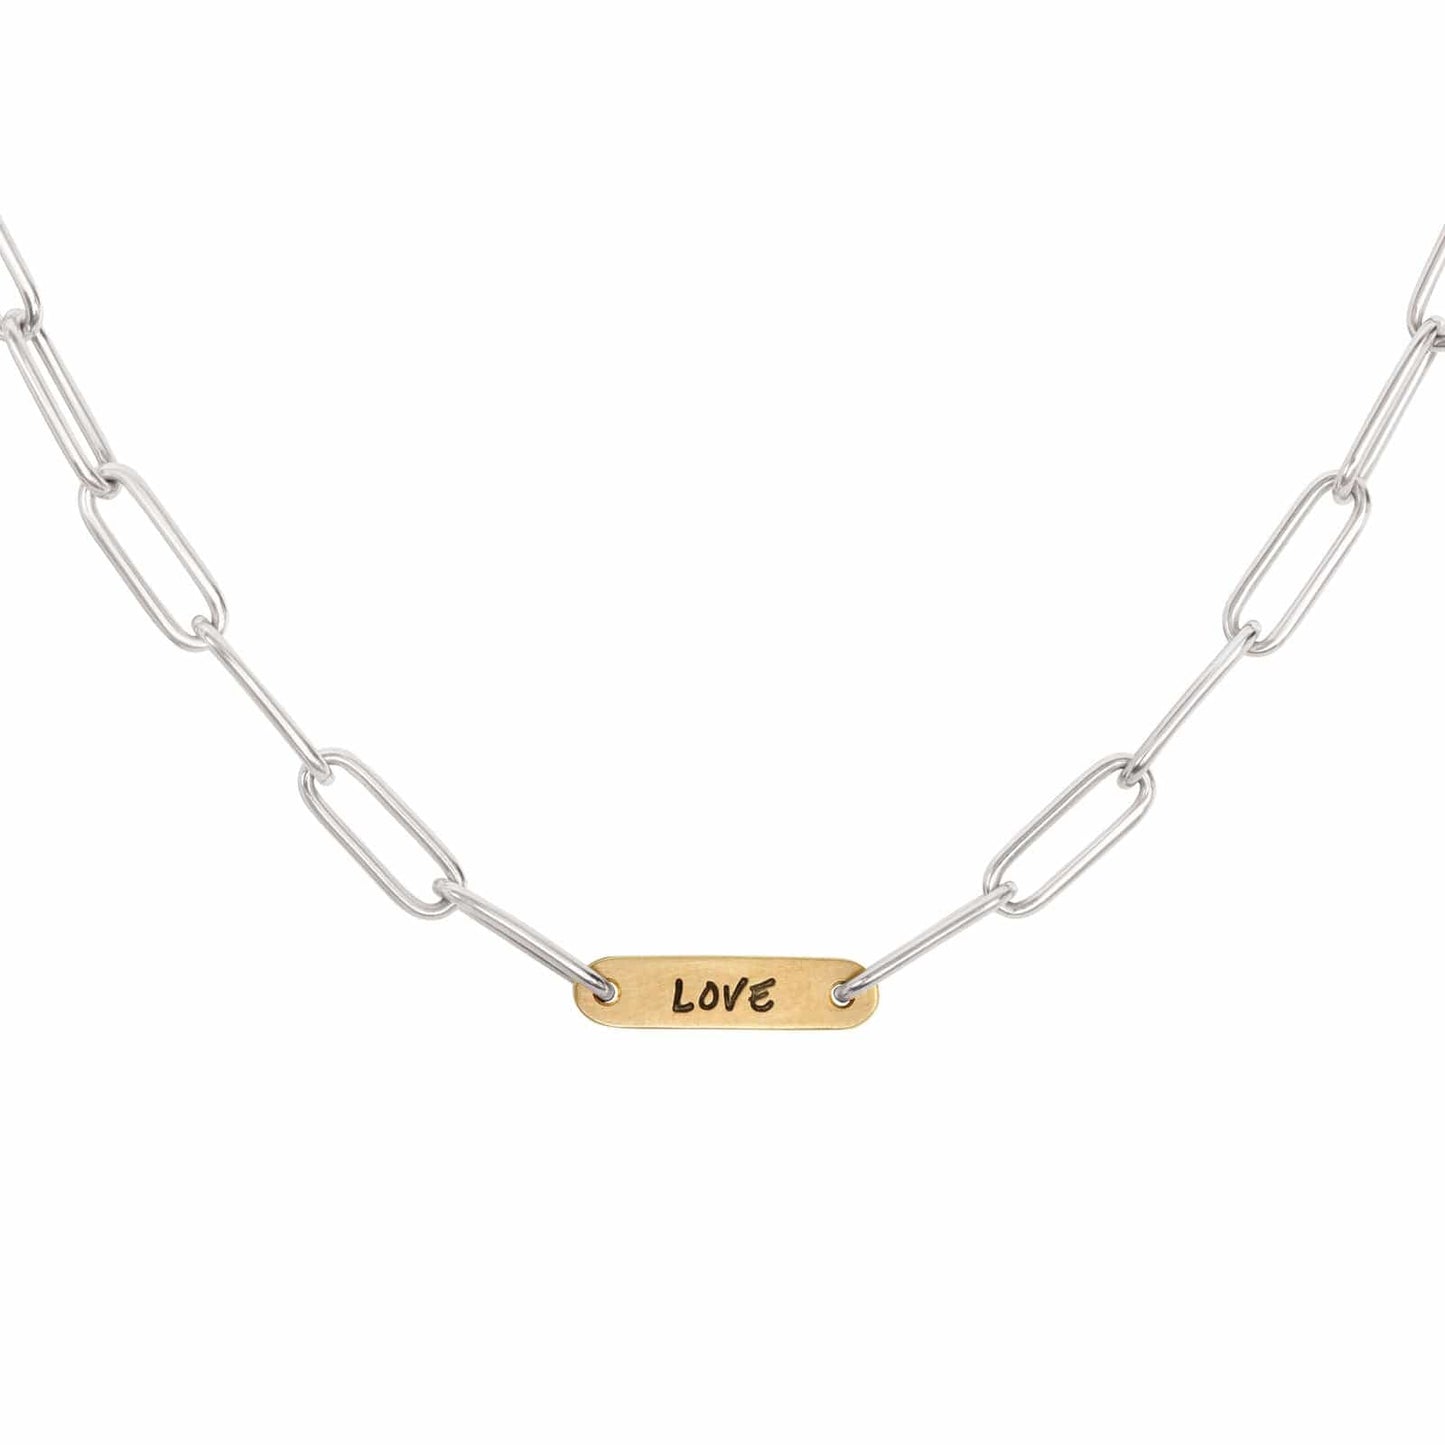 NKL-14K 5.2mm Silver & Gold Love Flat Bar Chain Necklace